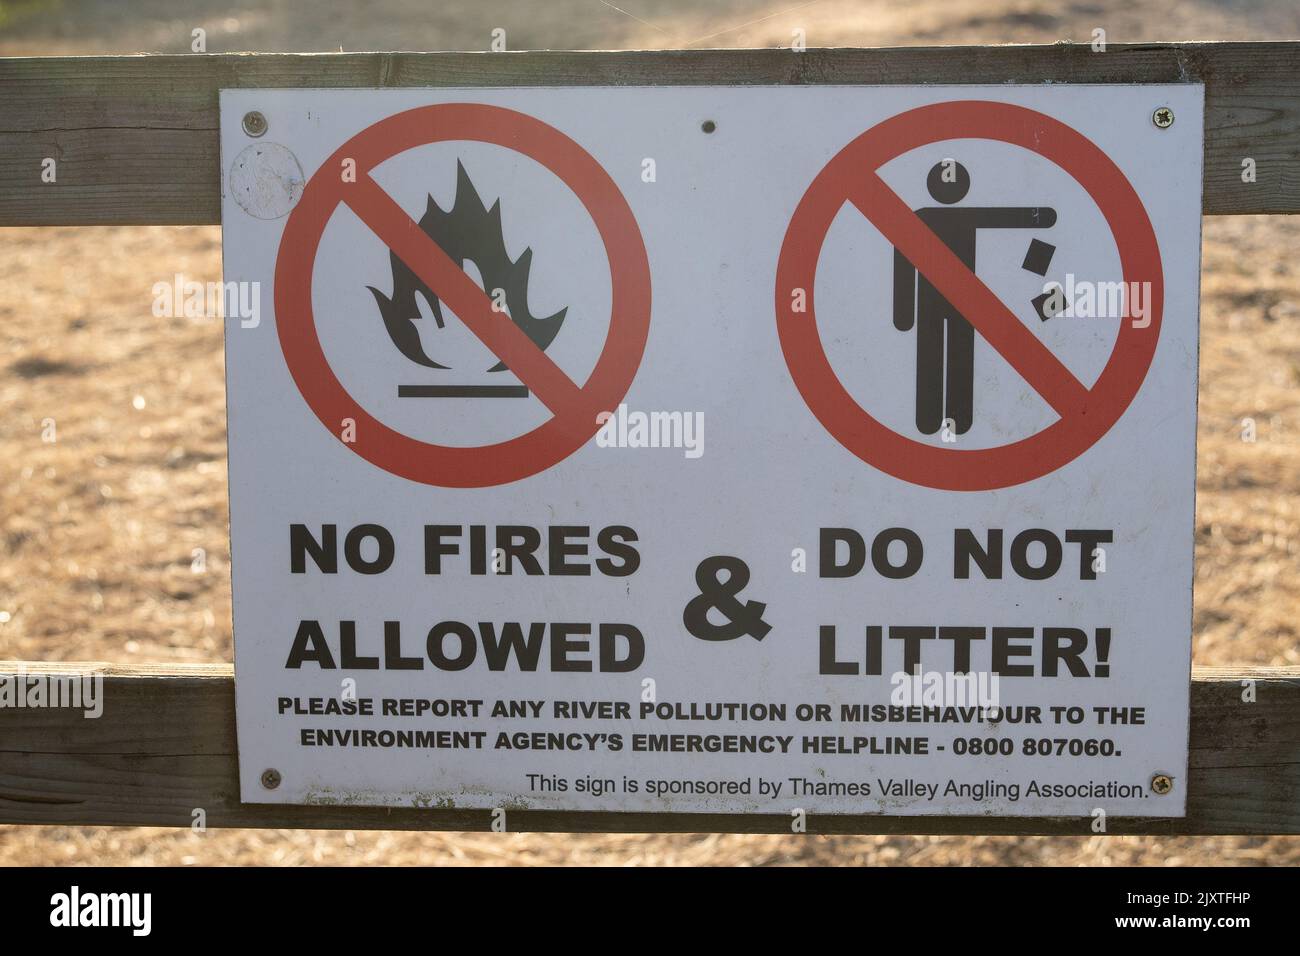 Dorney, Buckinghamshire, UK. 14th August, 2022. A no fires allowed sign by the Jubilee River. Credit: Maureen McLean/Alamy Stock Photo